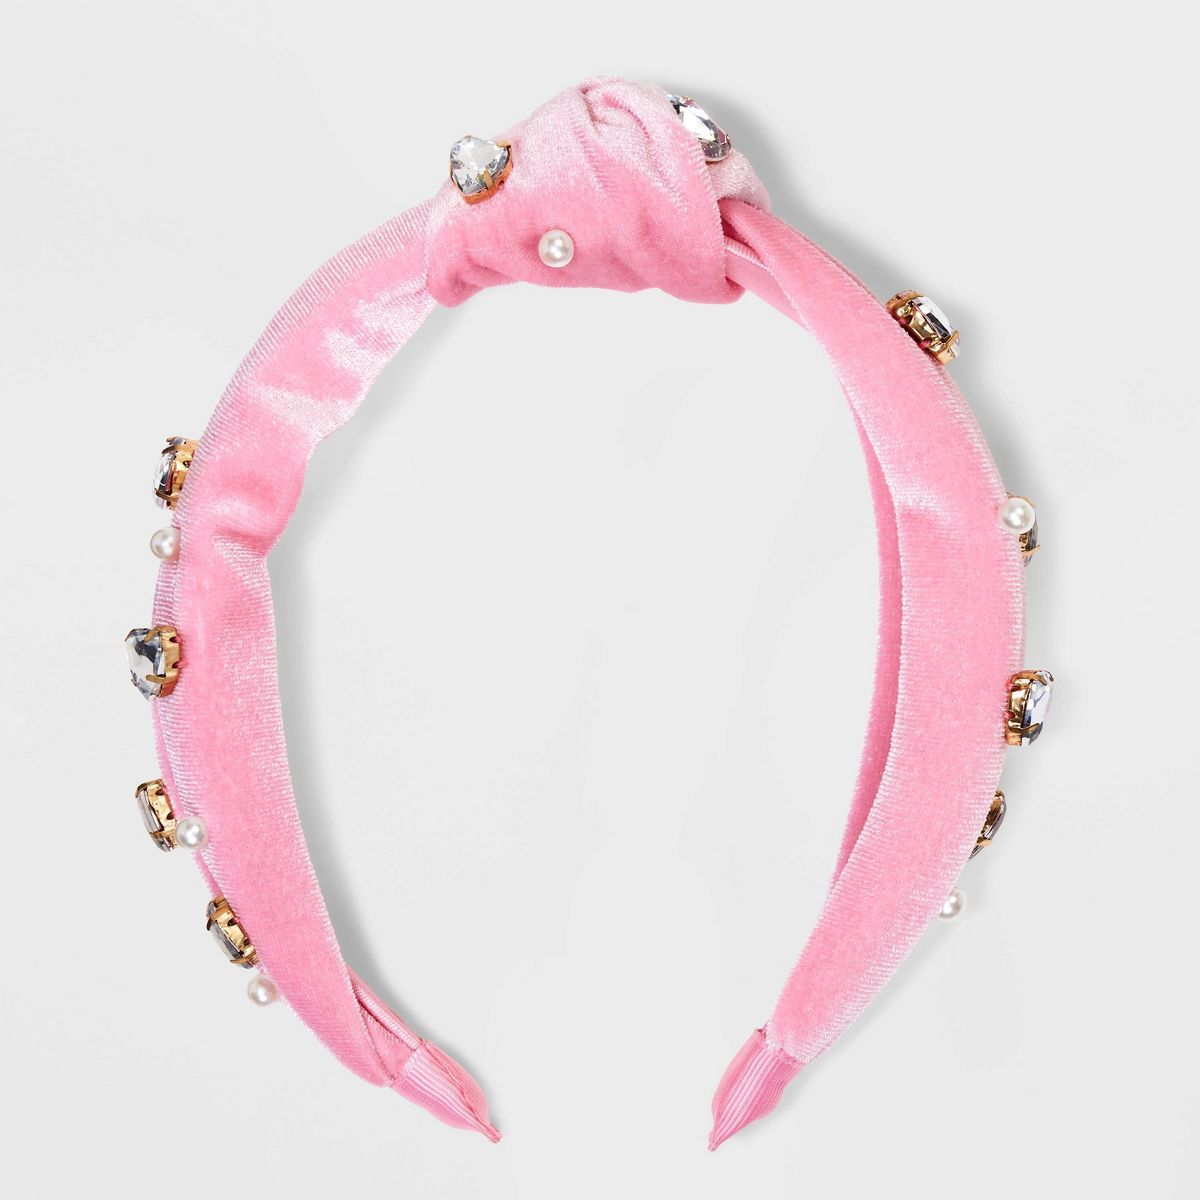 Pearls and Heart Stones Knot Top Velvet Headband - A New Day™ Pink | Target